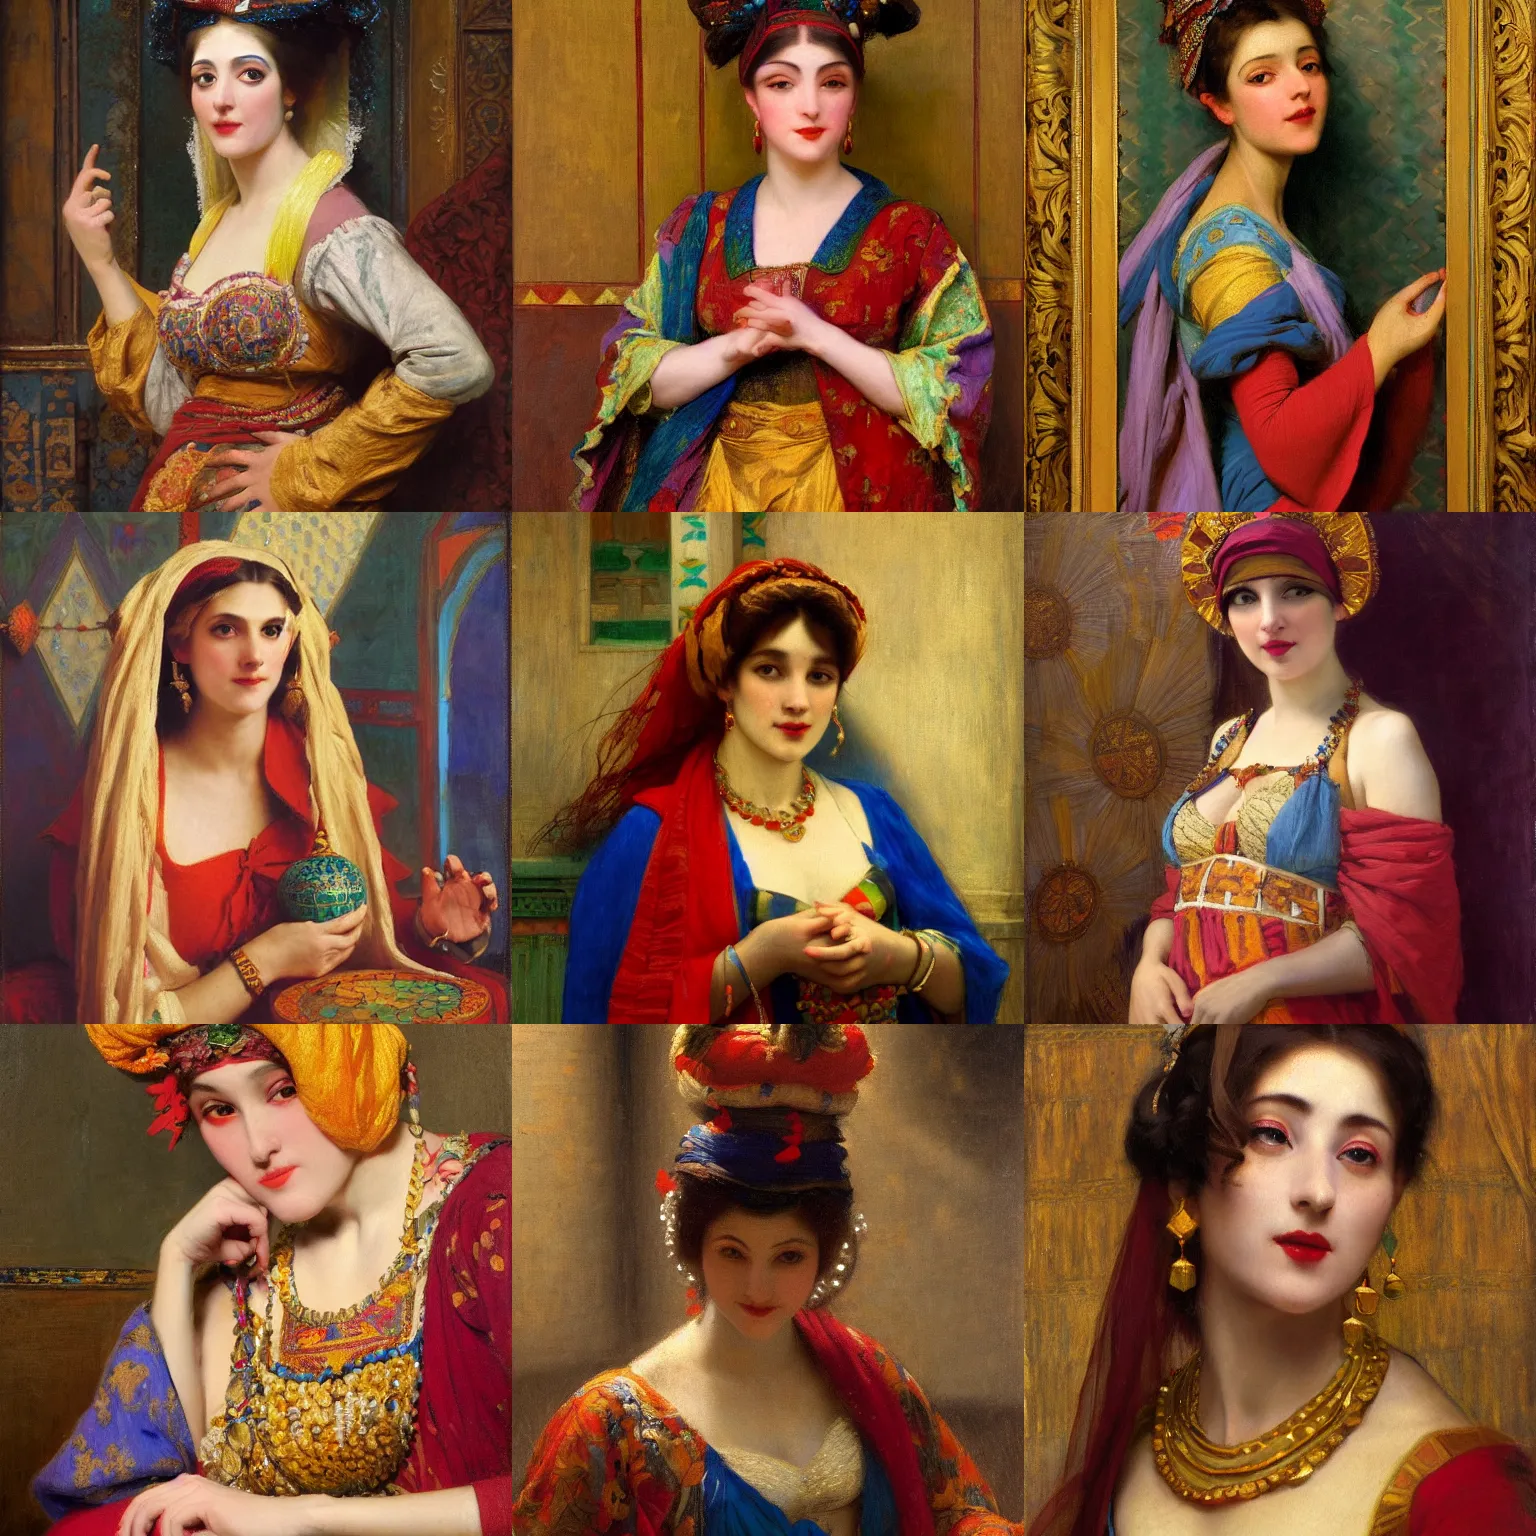 Prompt: orientalism painting of a beautiful female jester by edwin longsden long and theodore ralli and nasreddine dinet and adam styka, masterful intricate art. oil on canvas, excellent lighting, high detail 8 k